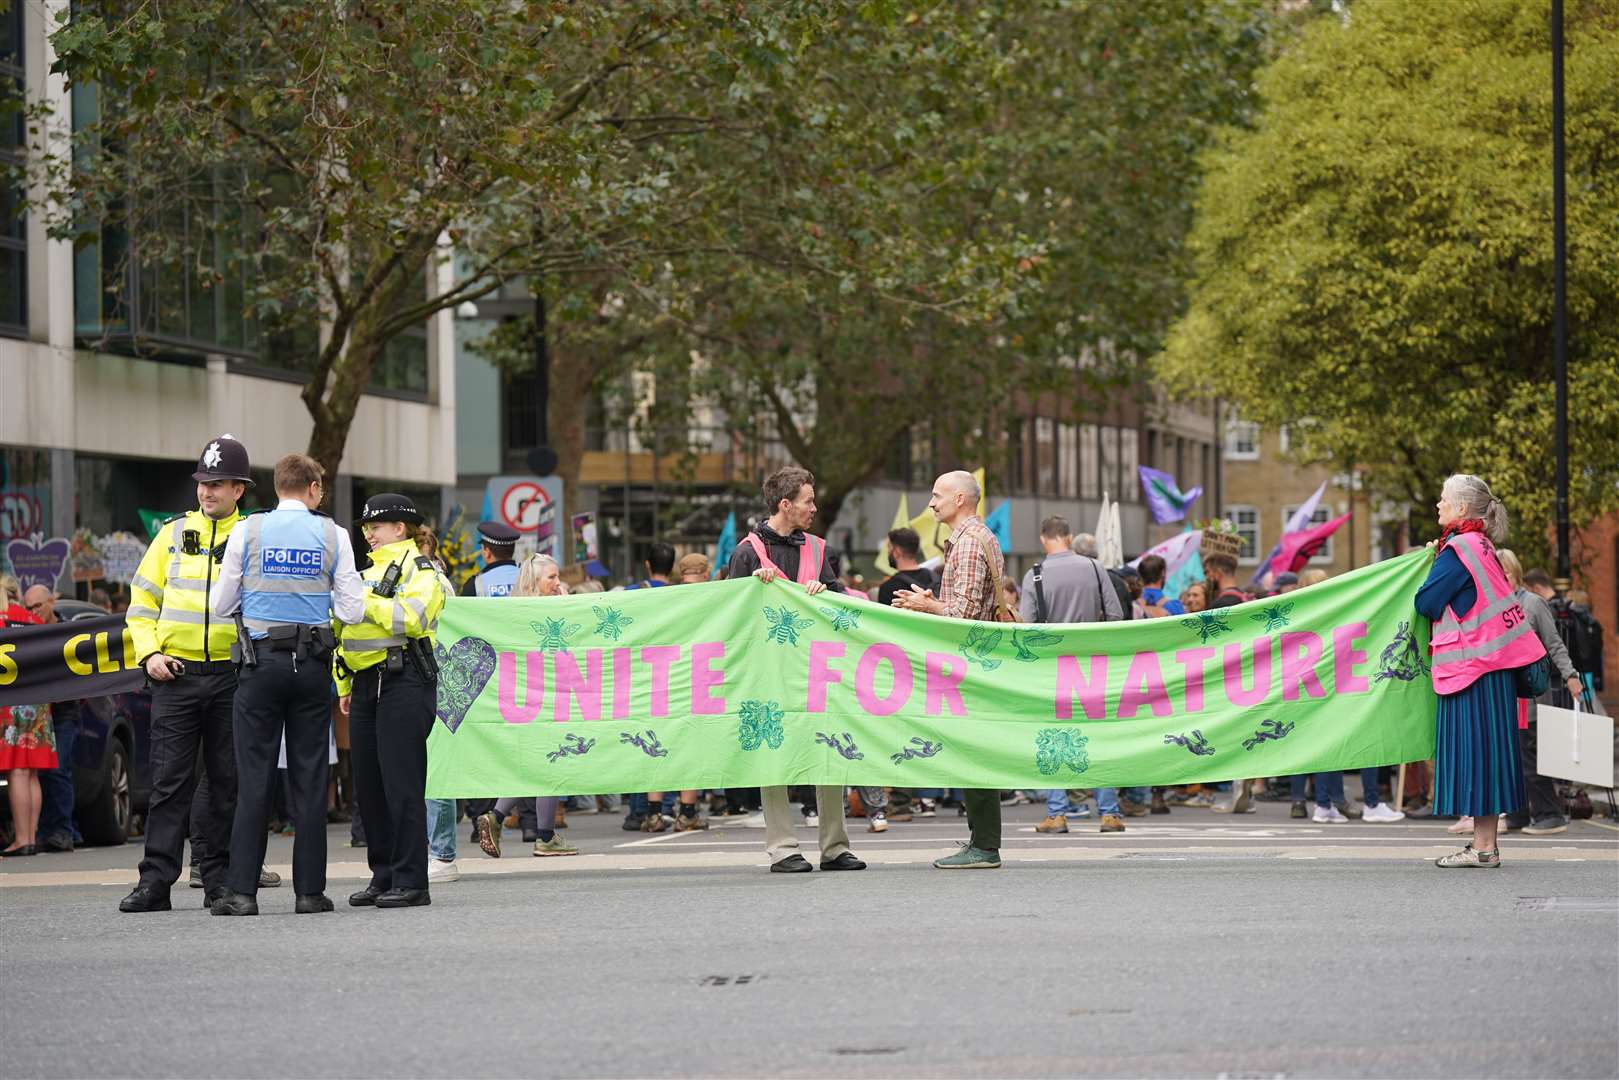 Campaigners blocked the road outside the Defra offices as they demanded more action on nature protection (Yui Mok/PA)